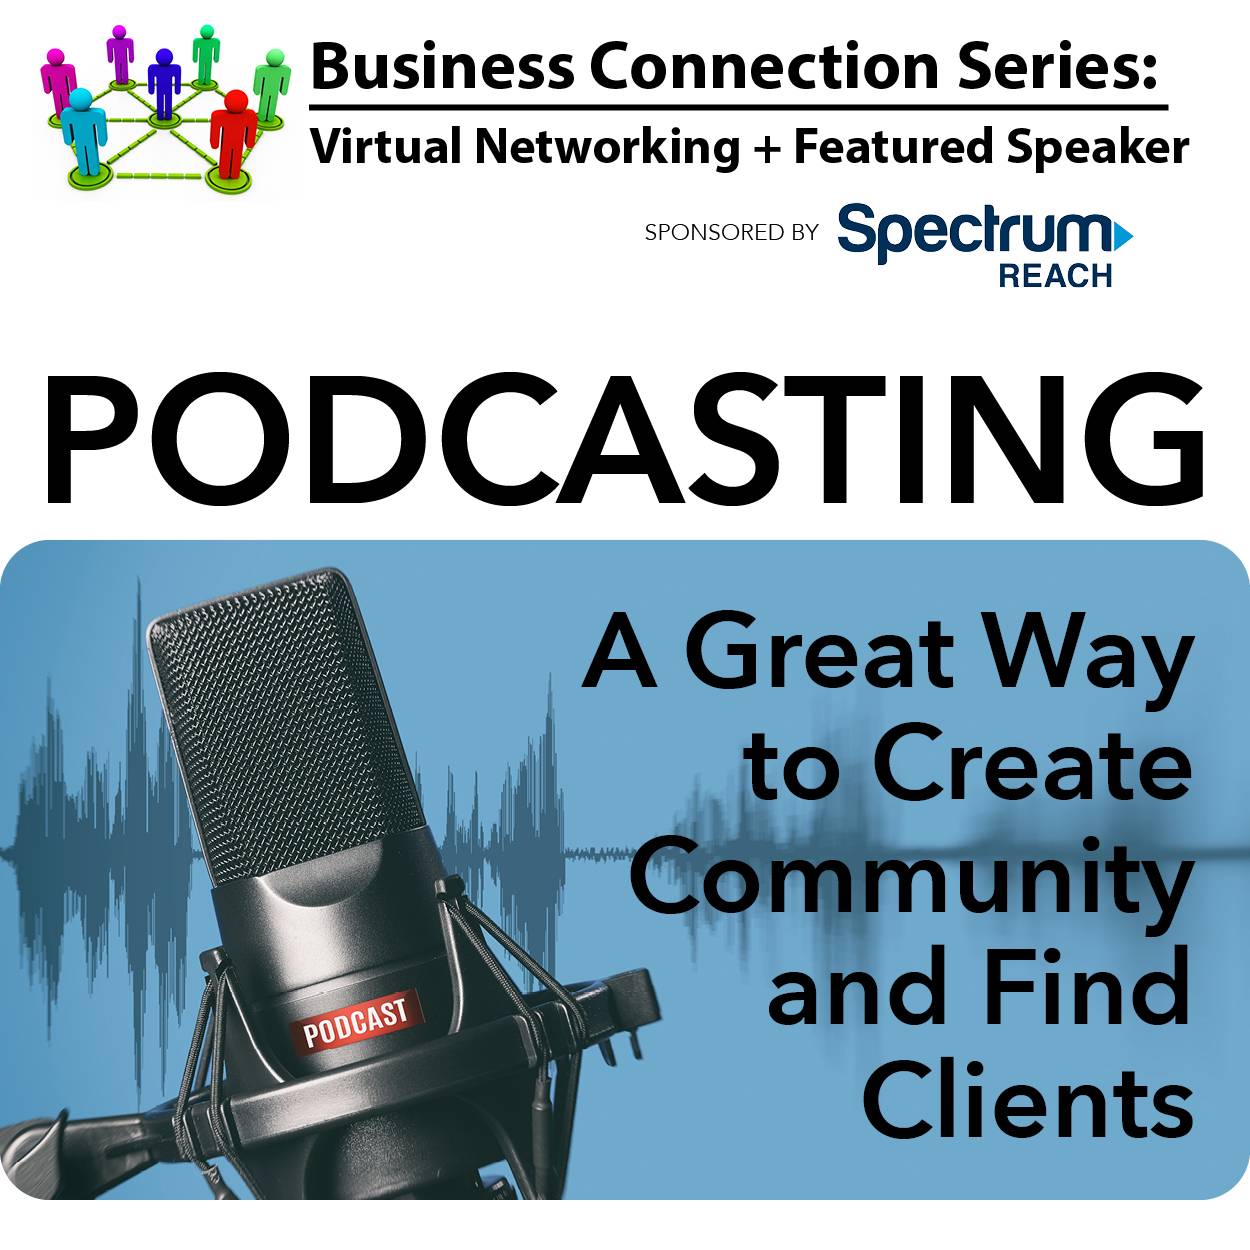 August Business Connections: Virtual Networking + PODCASTING: A Great Way to Create Community and Find Clients